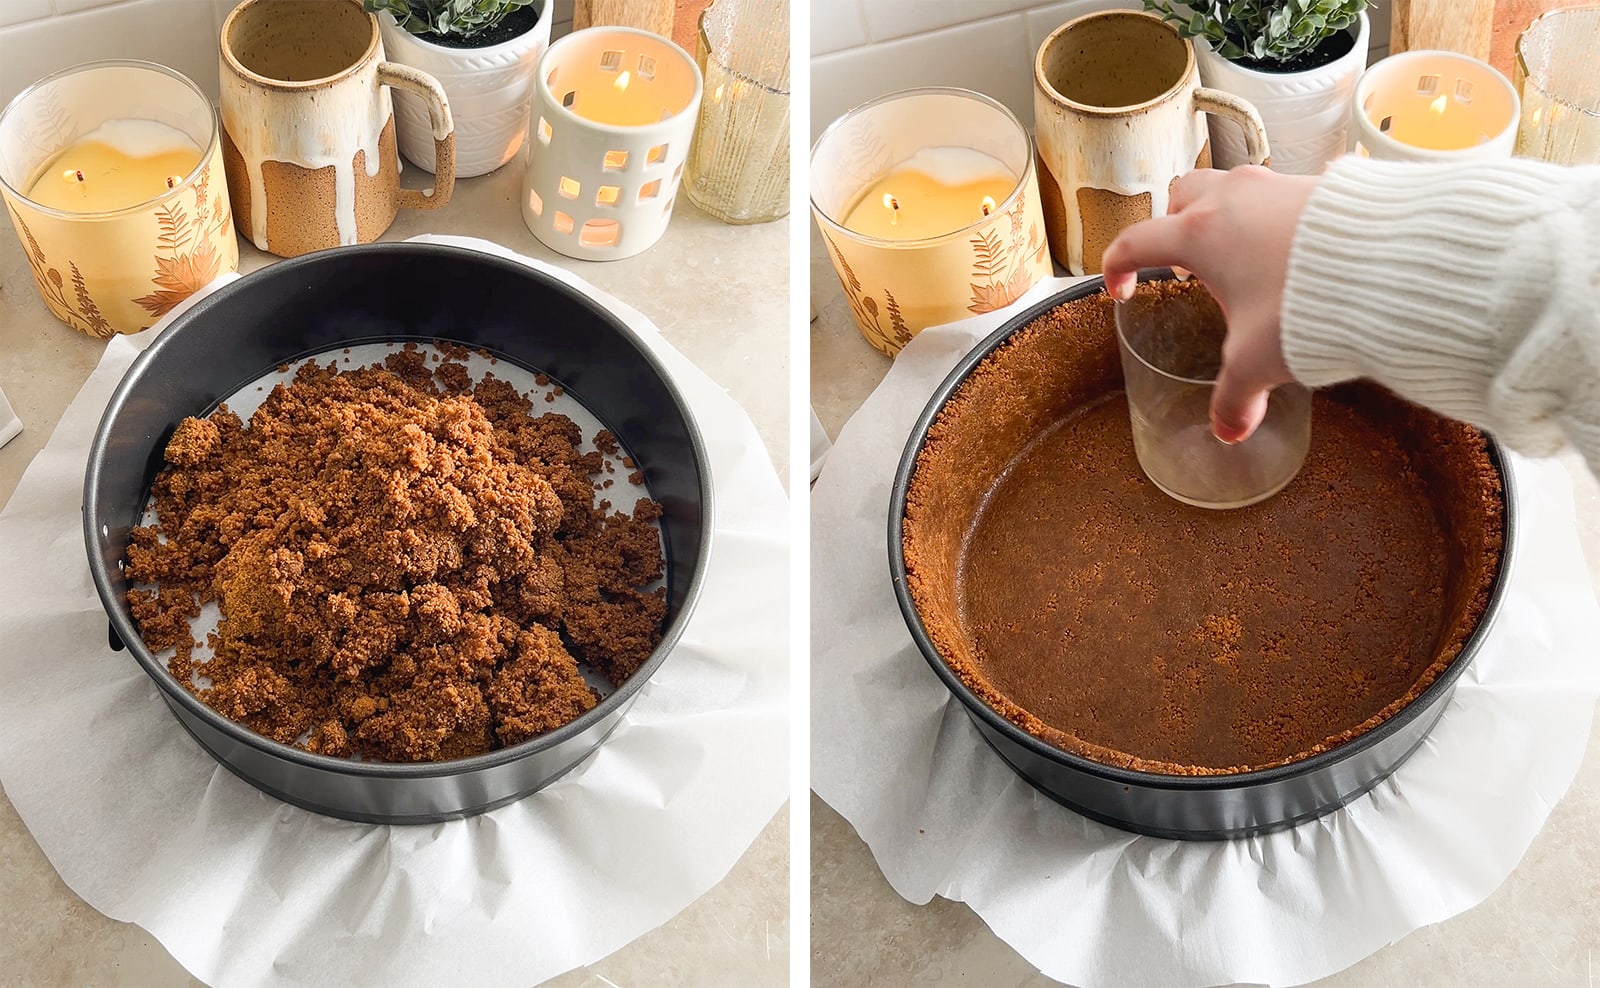 Left to right: biscoff crumb mixture in a pan, pressing biscoff crust into pan with a cup.